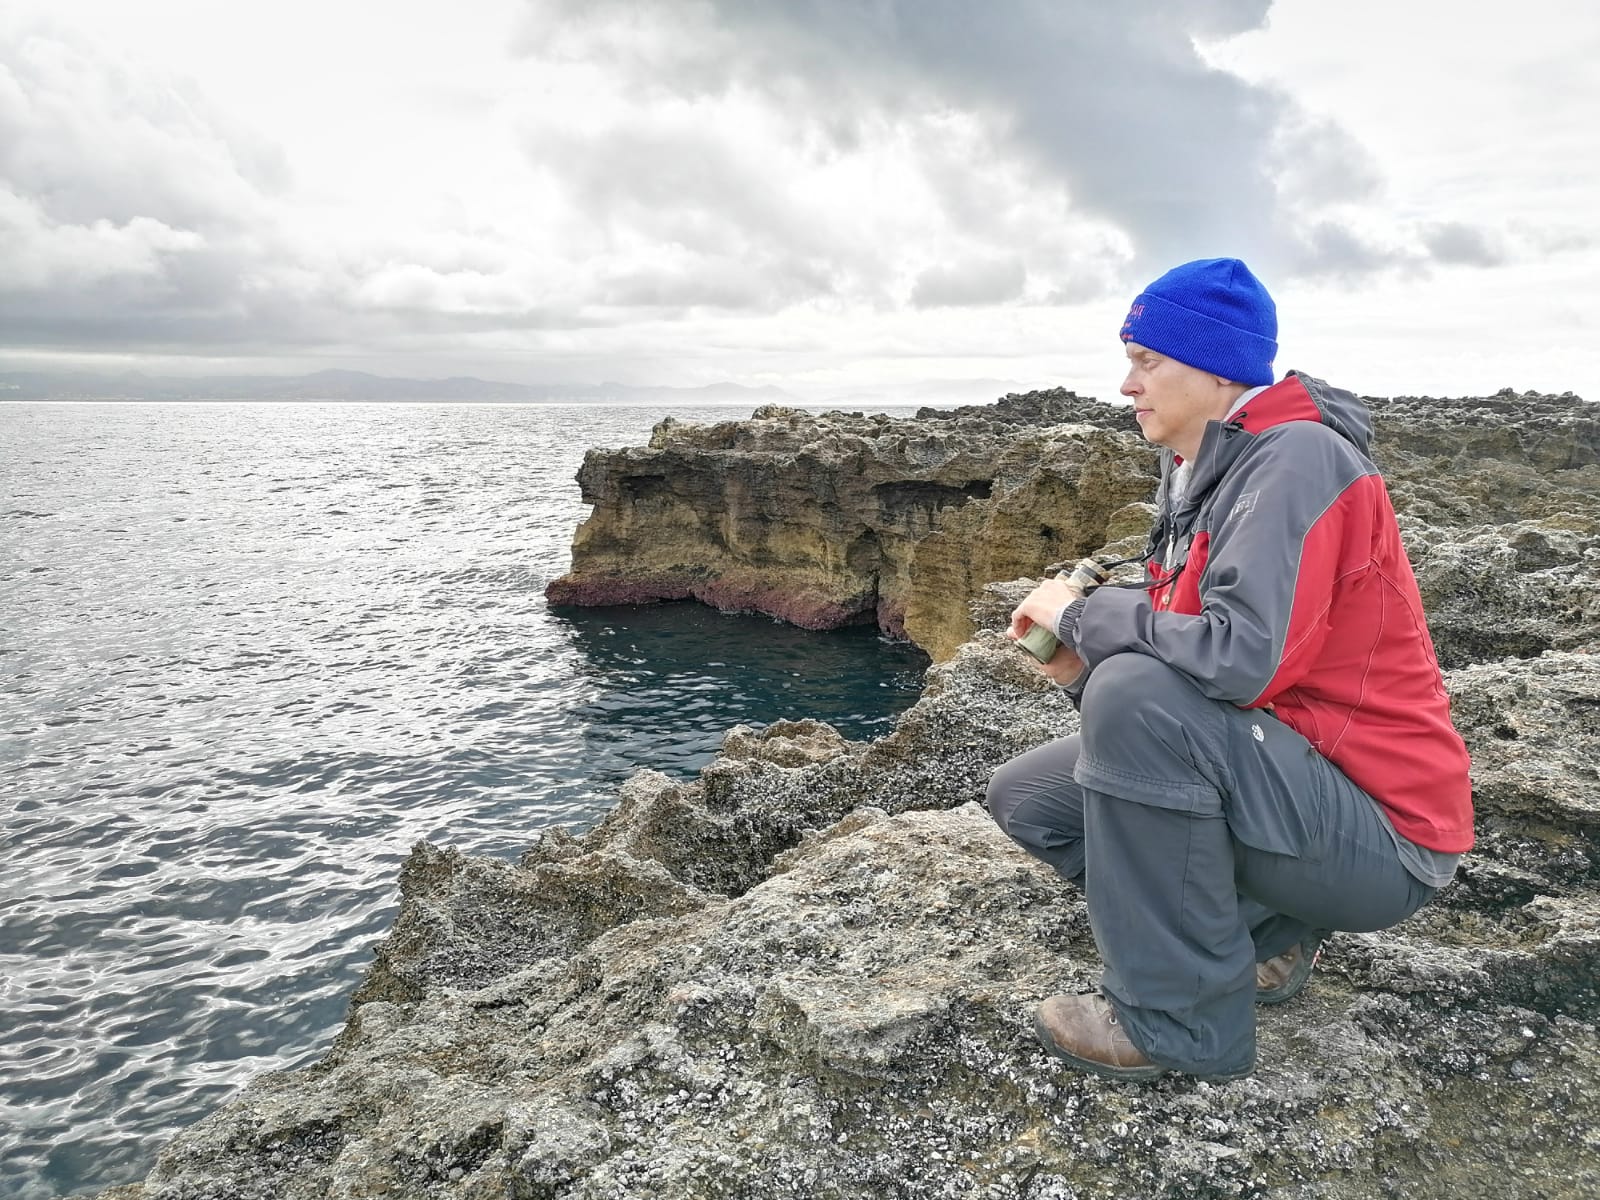 a scientist in a boise state hat kneels on a cliff edge overlooking the ocean, holding binoculars